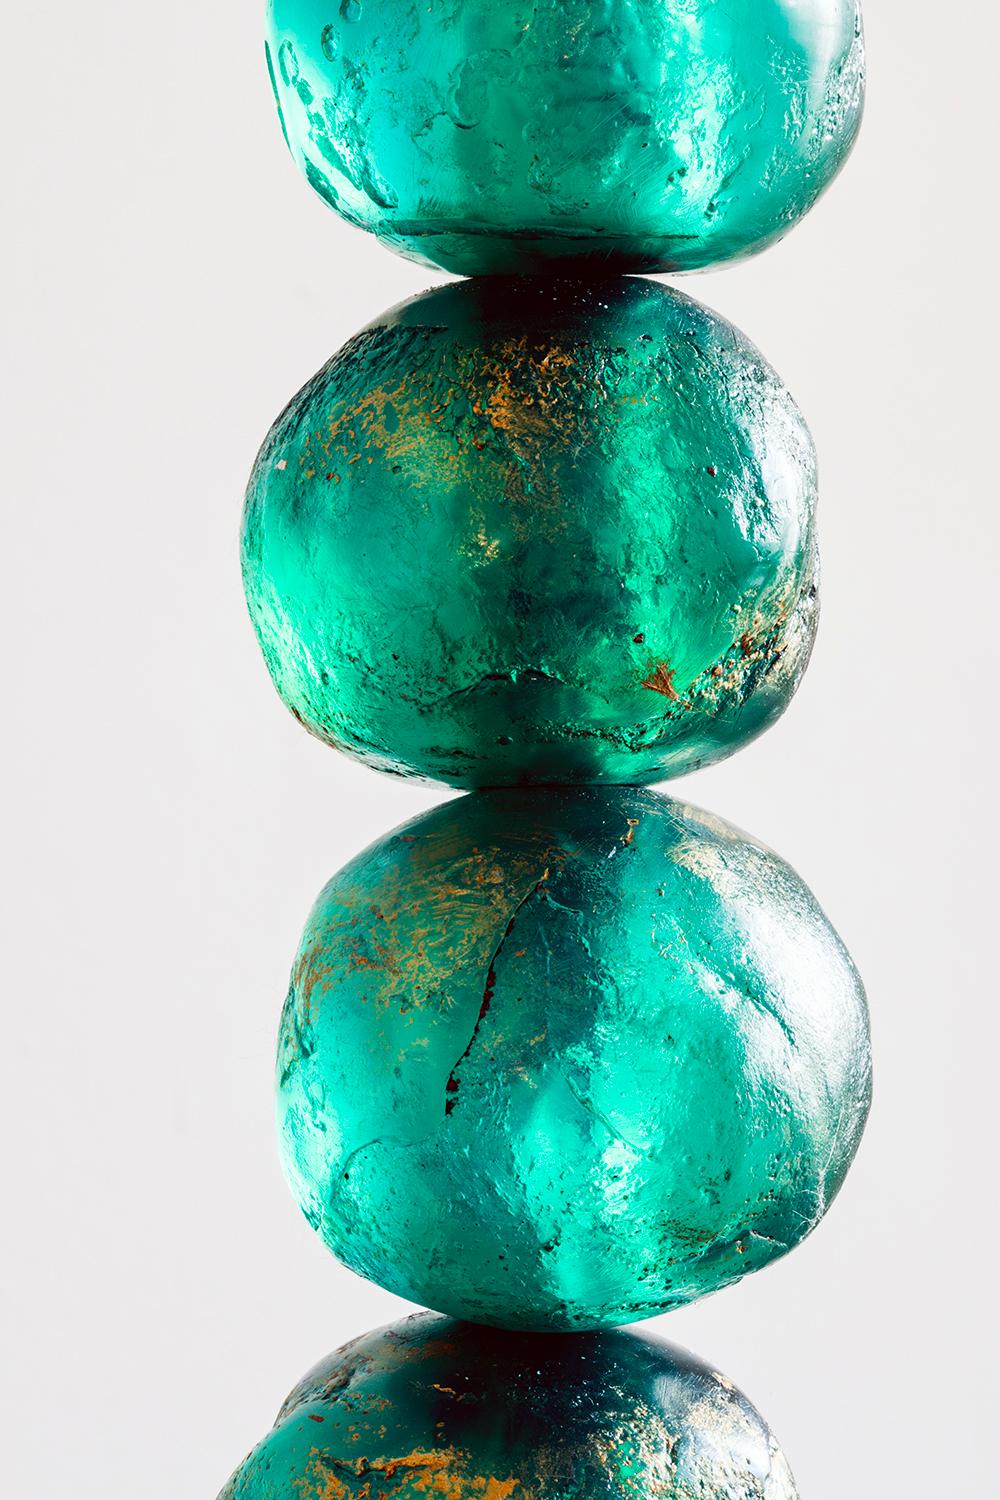 This Margit Wittig vibrant emerald with gold-leaf patina table lamp features multiple translucent resin hand-cast spheres and semi-circles. The hint of gold patina enhances the organic surface textures which are interspersed with two brass details,